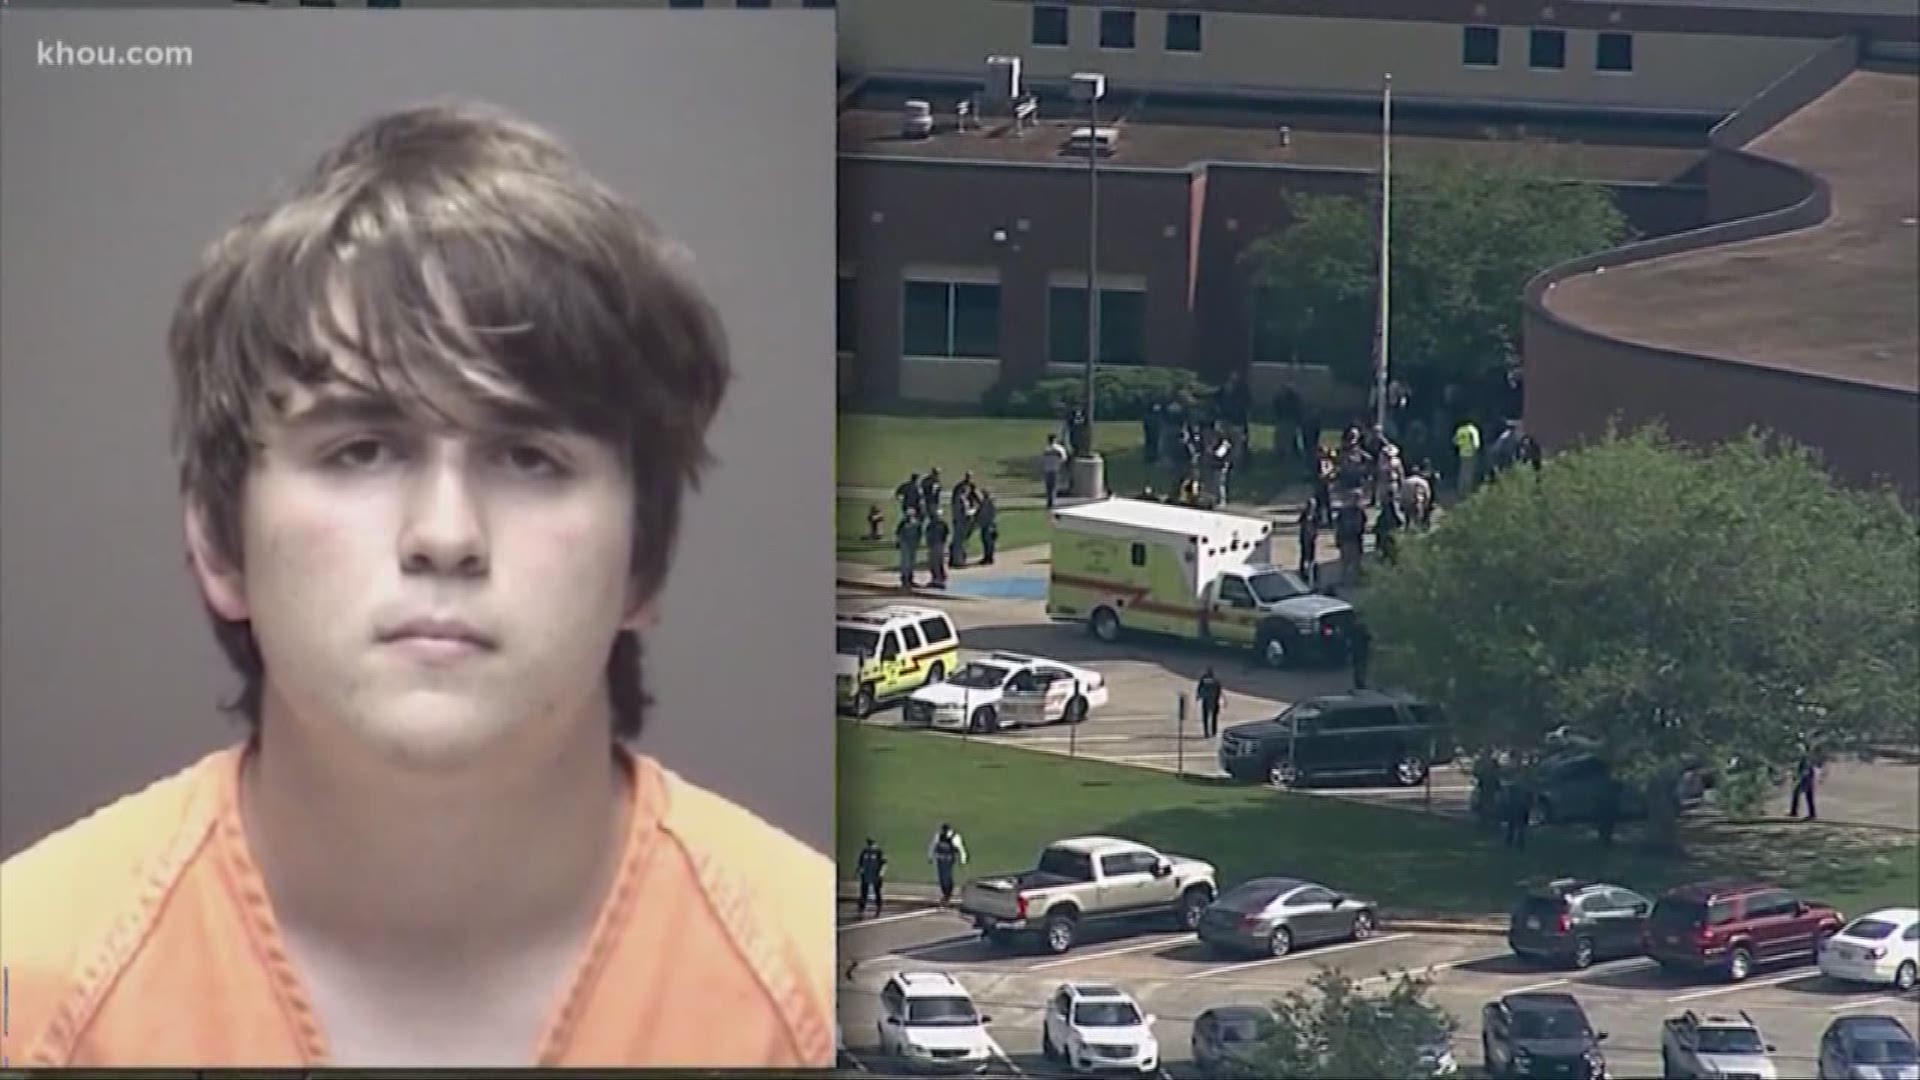 Attorneys for accused Santa Fe High School shooter, Dimitrios Pagourtzis, are looking to change the venue for the trial. His lawyers stated that the case produced so much prejudice in the community, the defendant wouldn't get a fair trial.